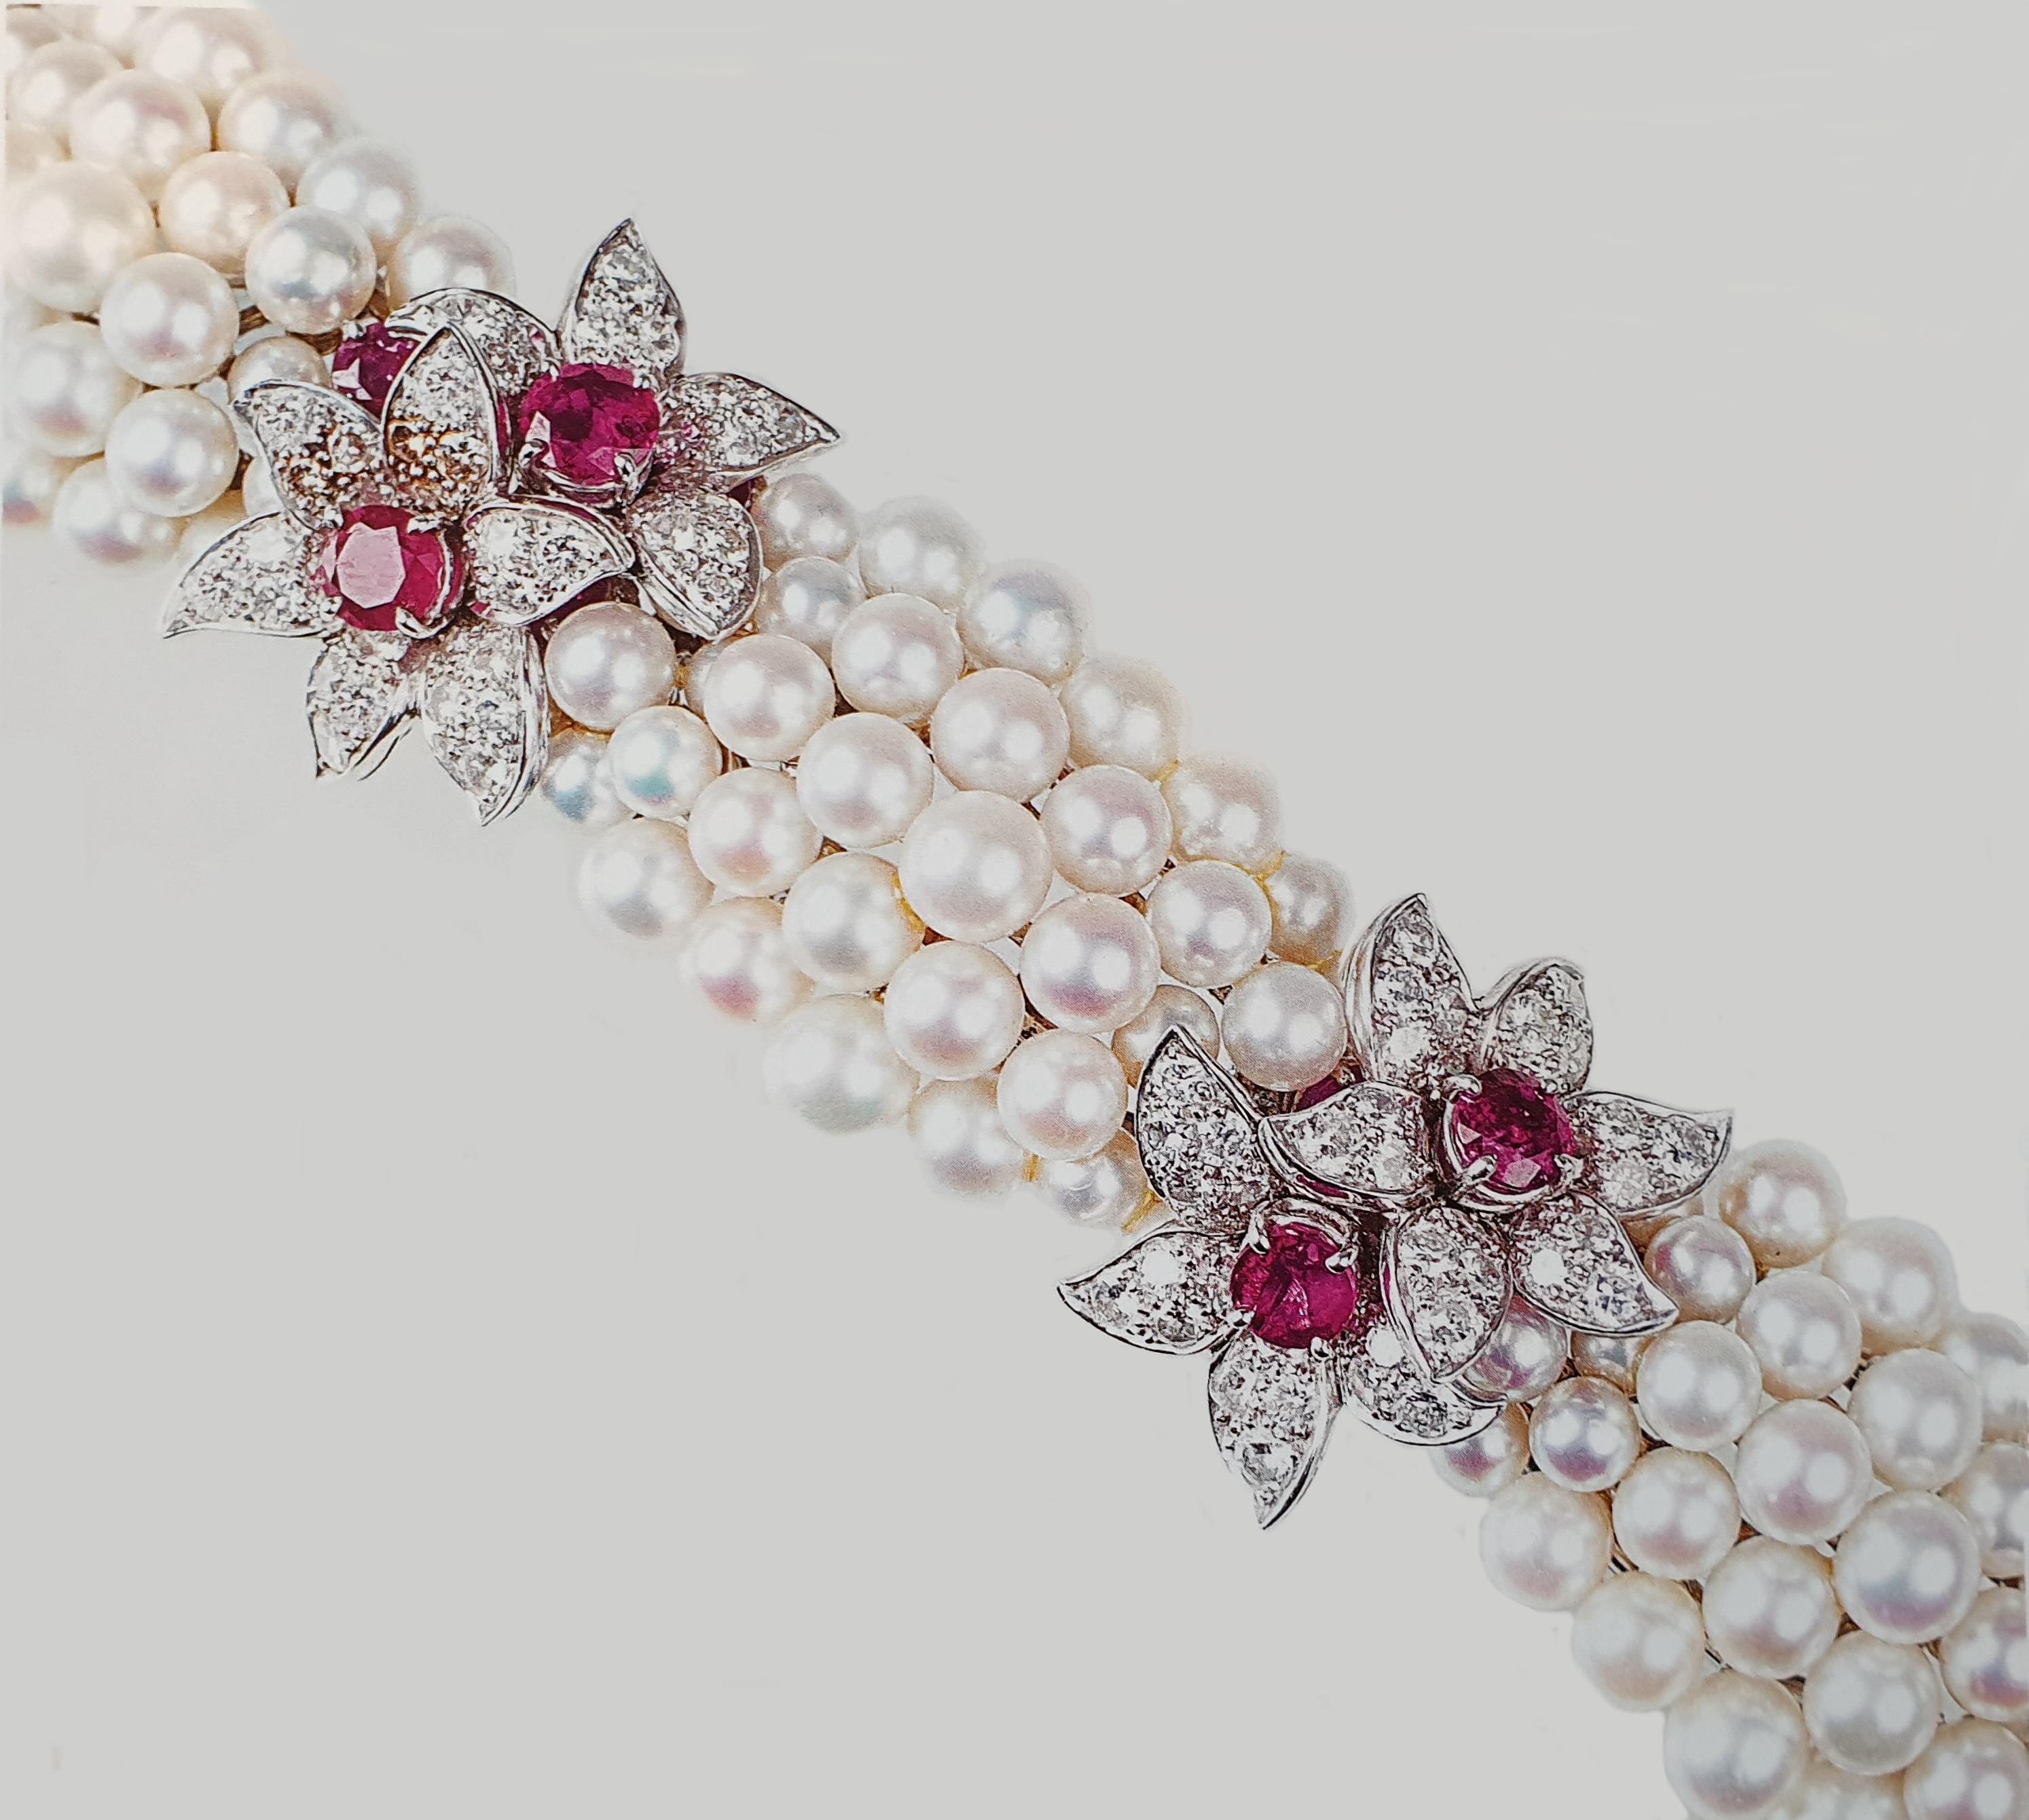 Germany, 1960s. 18 K gold. Flower shape. Composed of cultured pearls with diameter of 4-6,5 mm, 19 rubies weighing circa 5,1 carats and 168 brilliant-cut diamonds weighing approximately 6,60 carats, clarity VVS-VS, color G-H. 
Length: 6.89 in ( 17,5